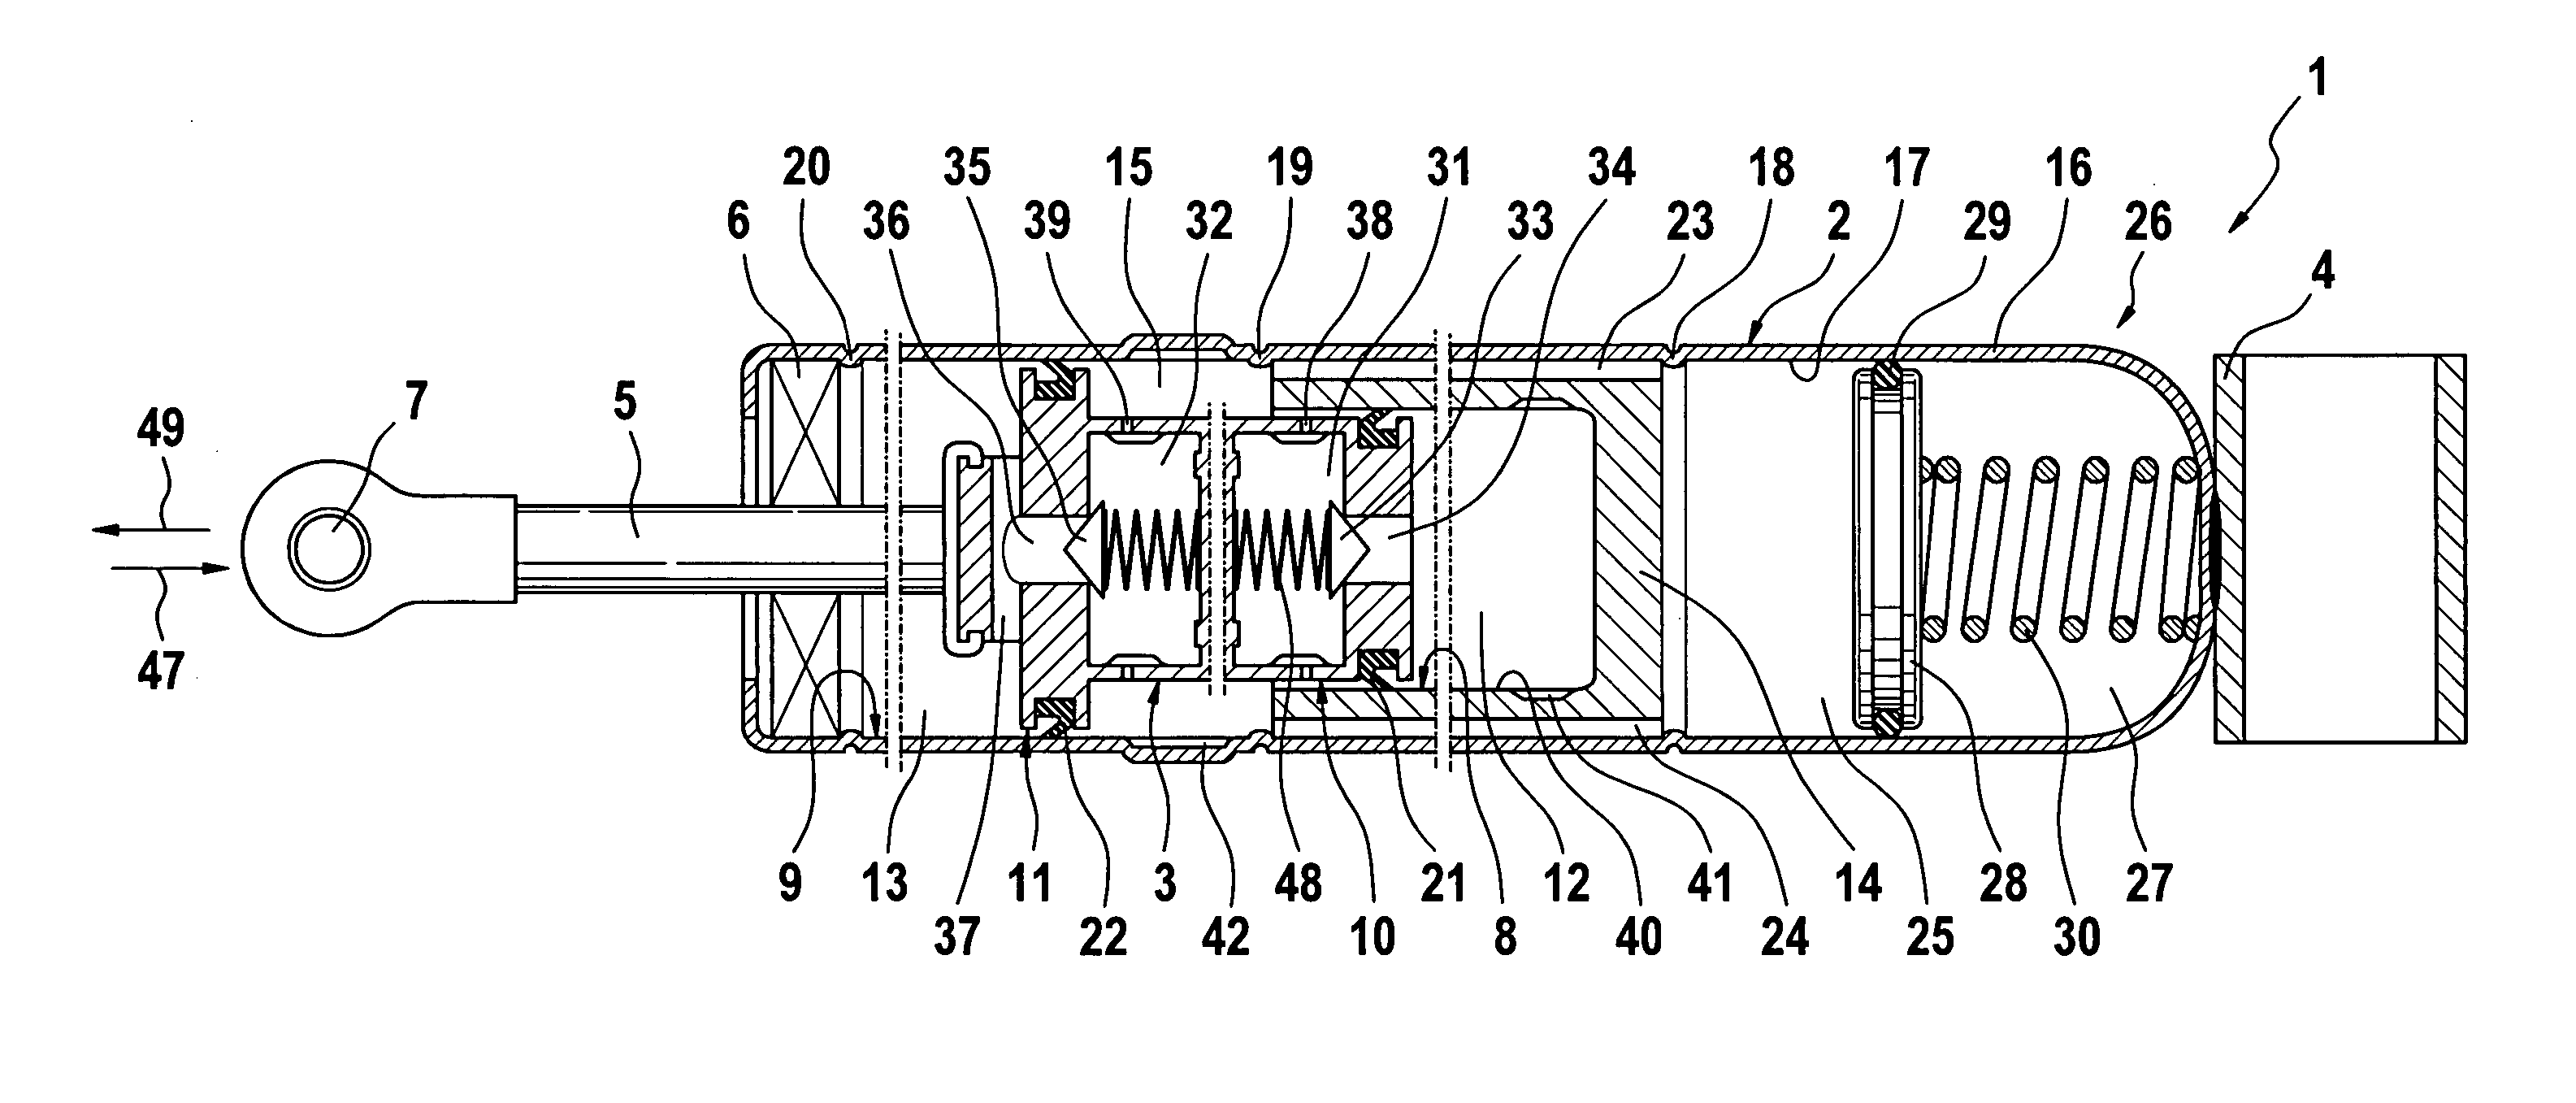 Continuously lockable adjustment device